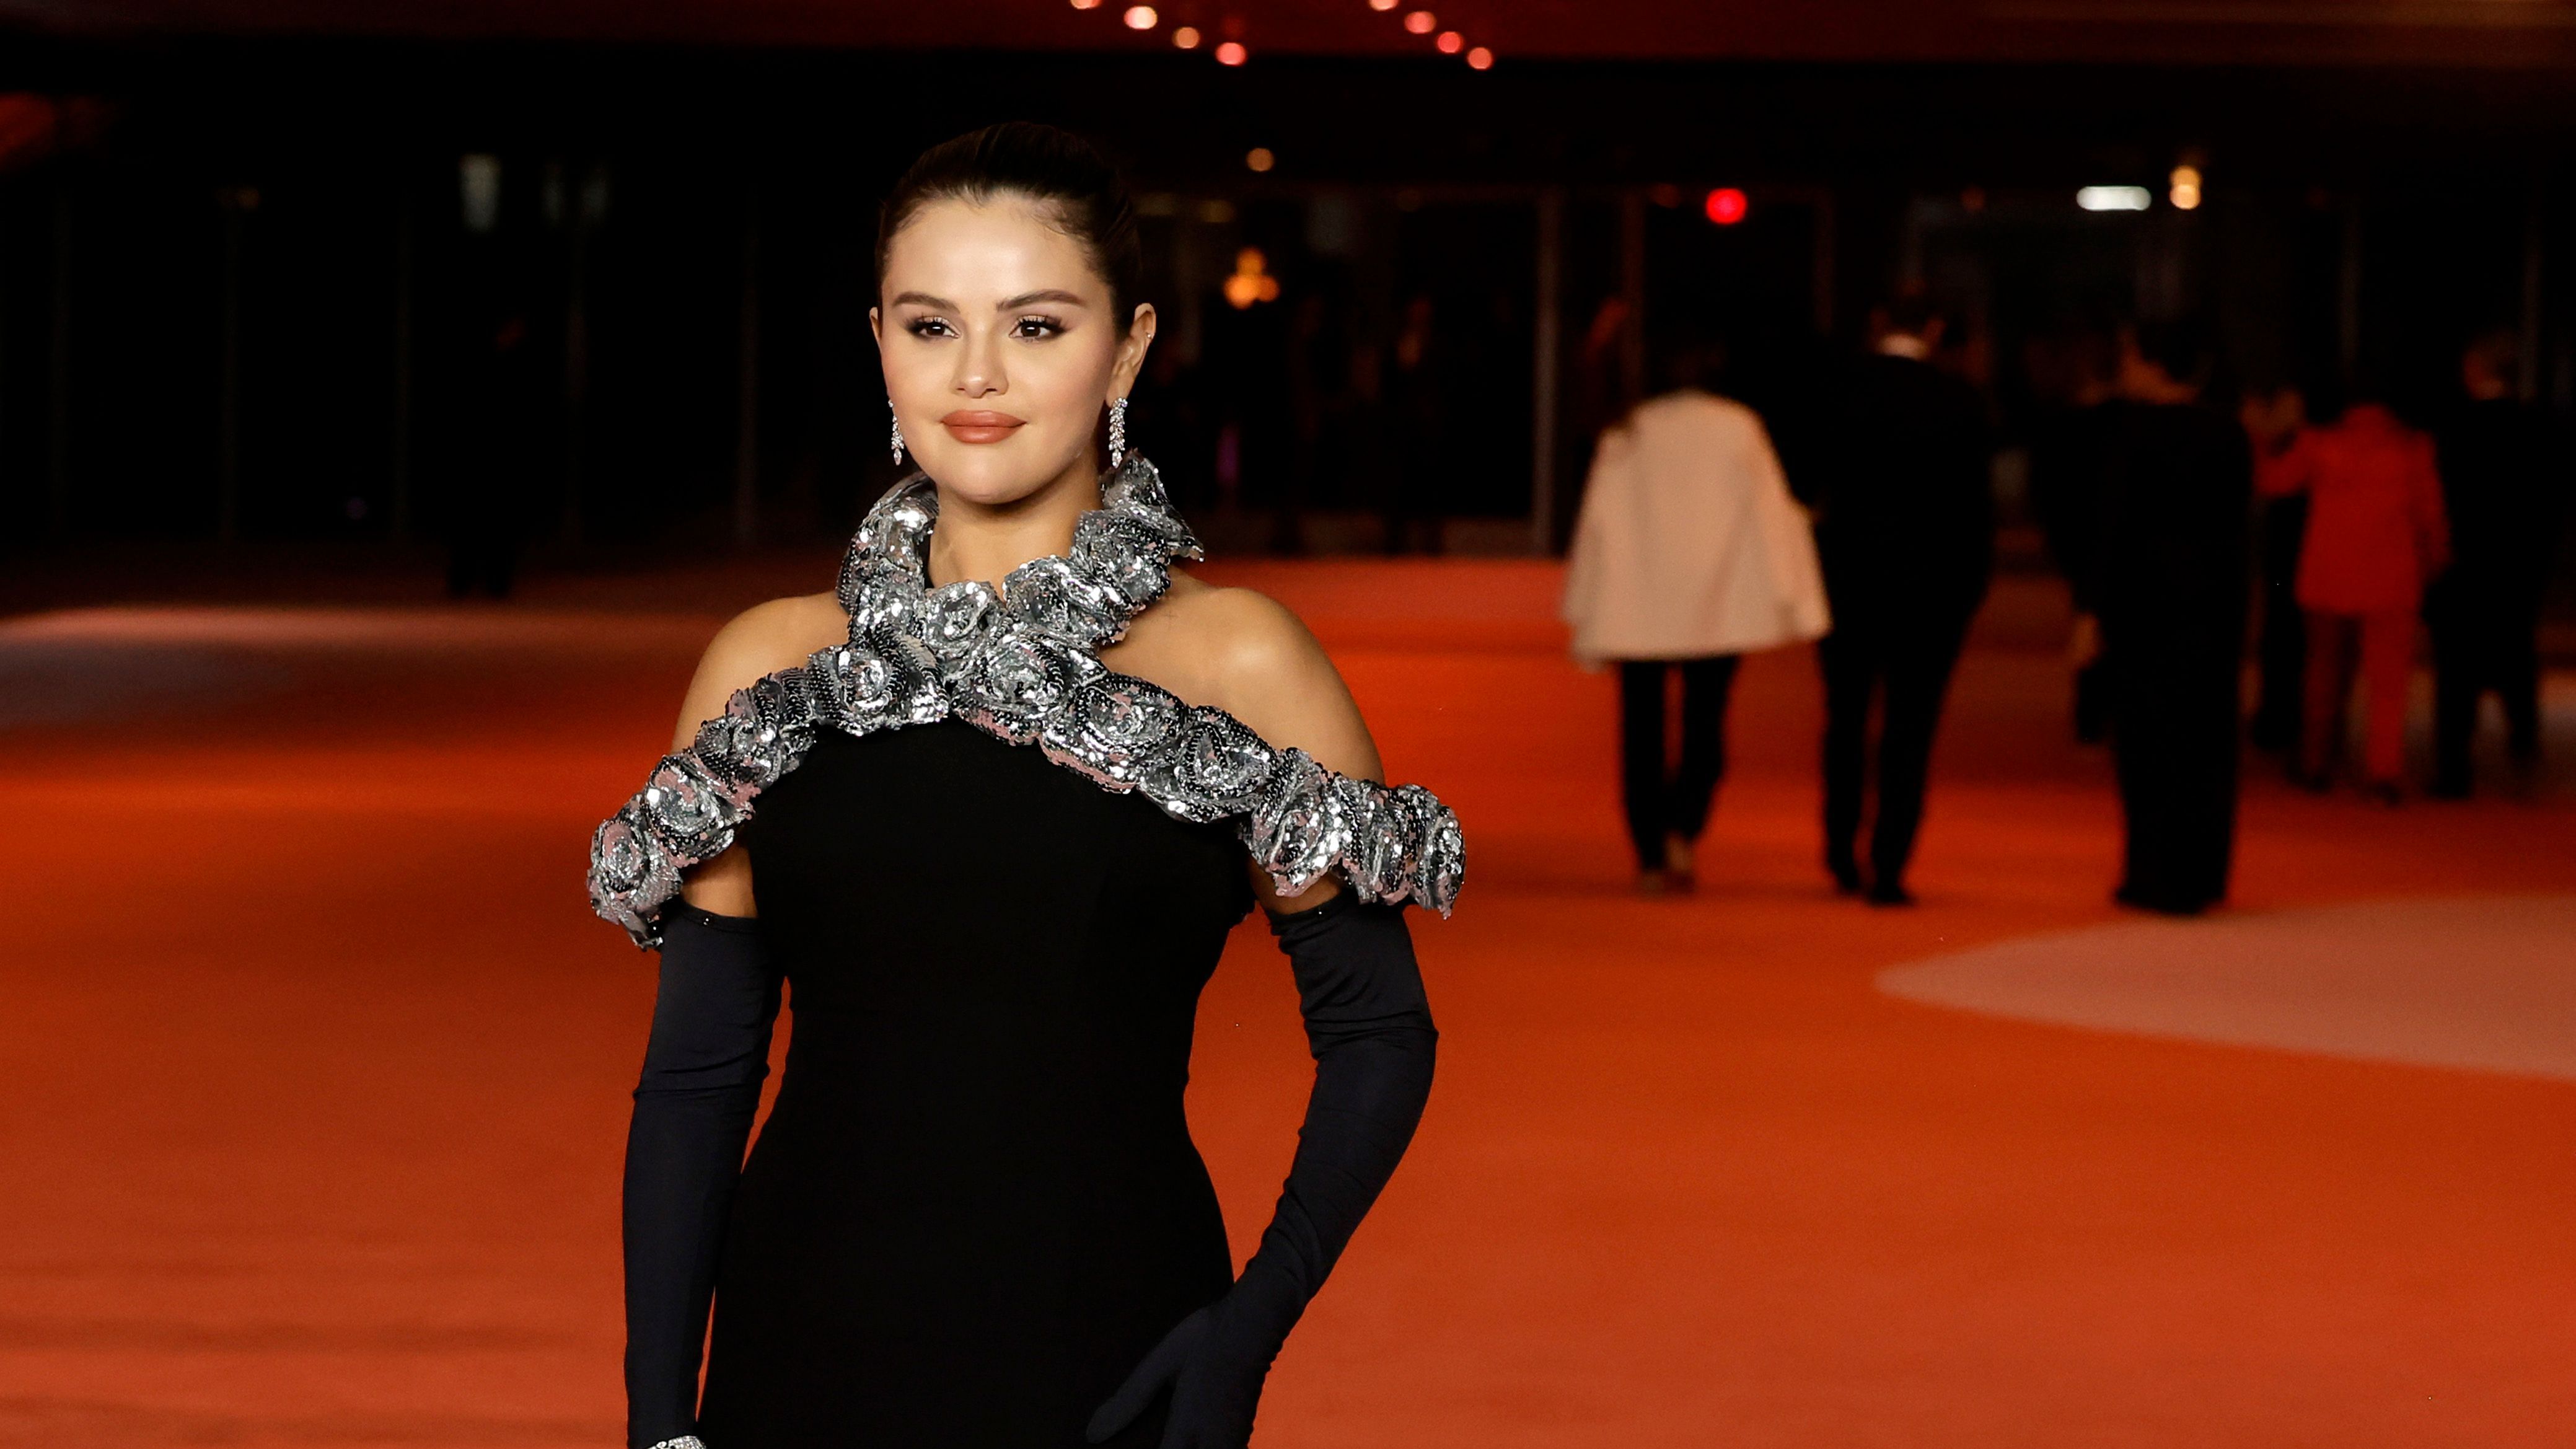 Selena Gomez's Floor-Length Gown Is Embellished With Sequin Rosettes